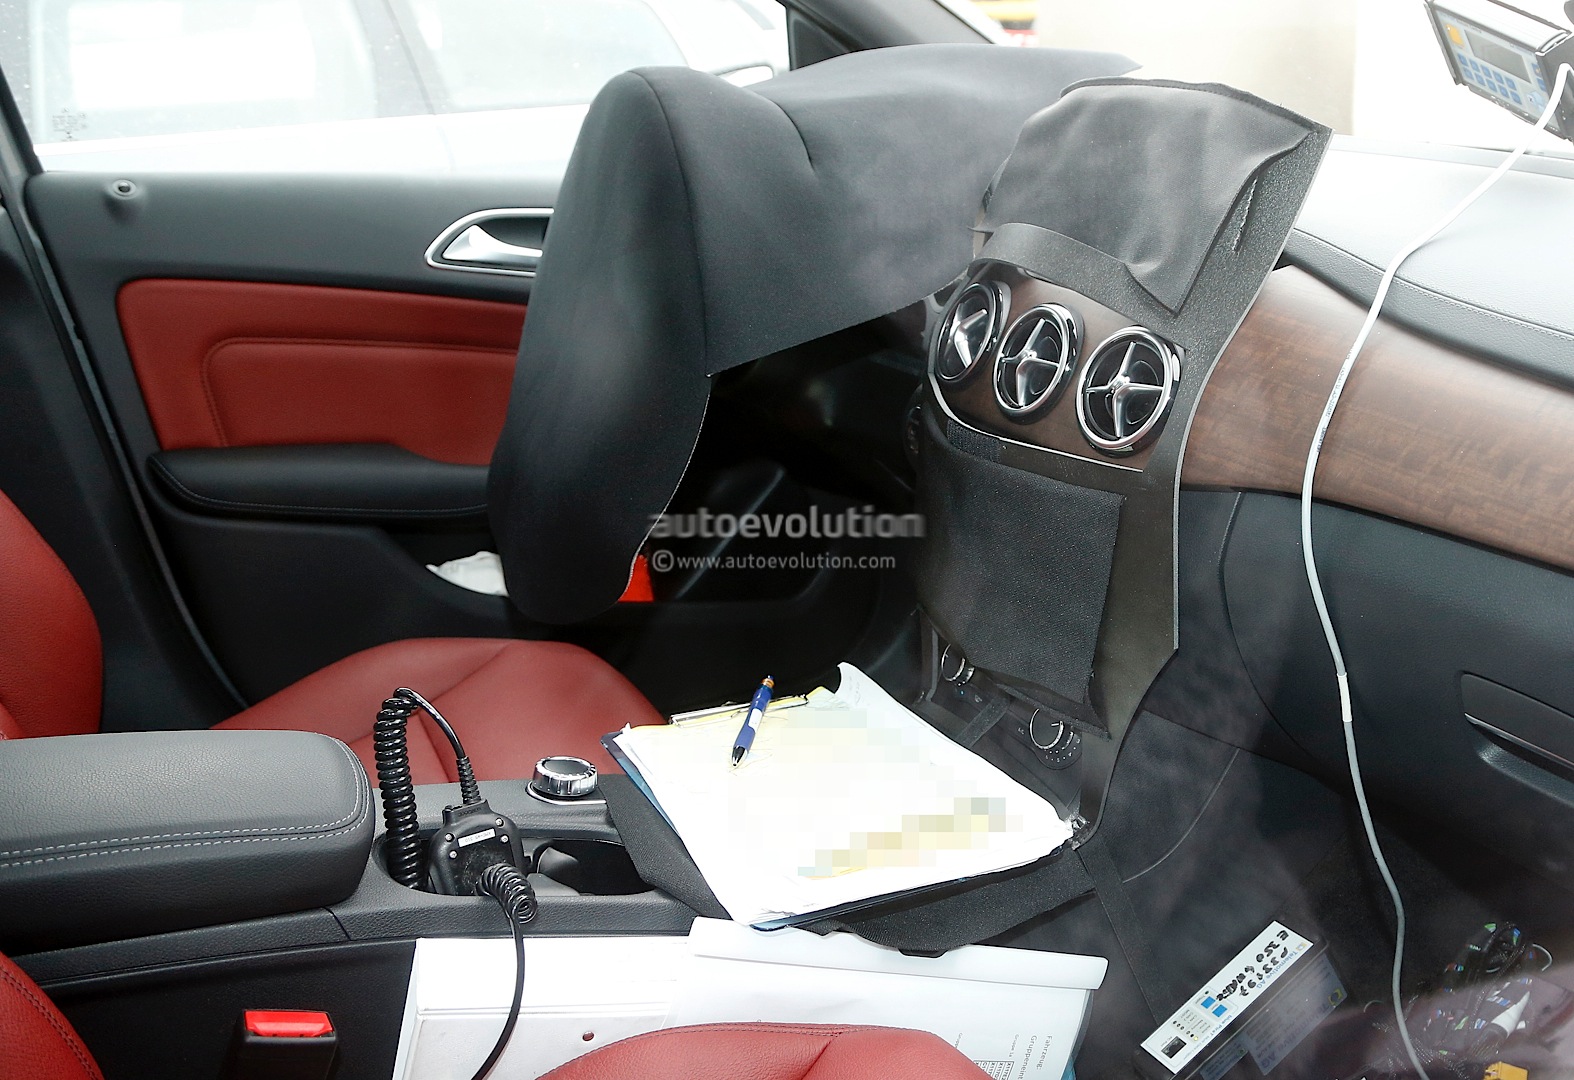 2015 B Class Facelift Interior Spotted During Winter Testing